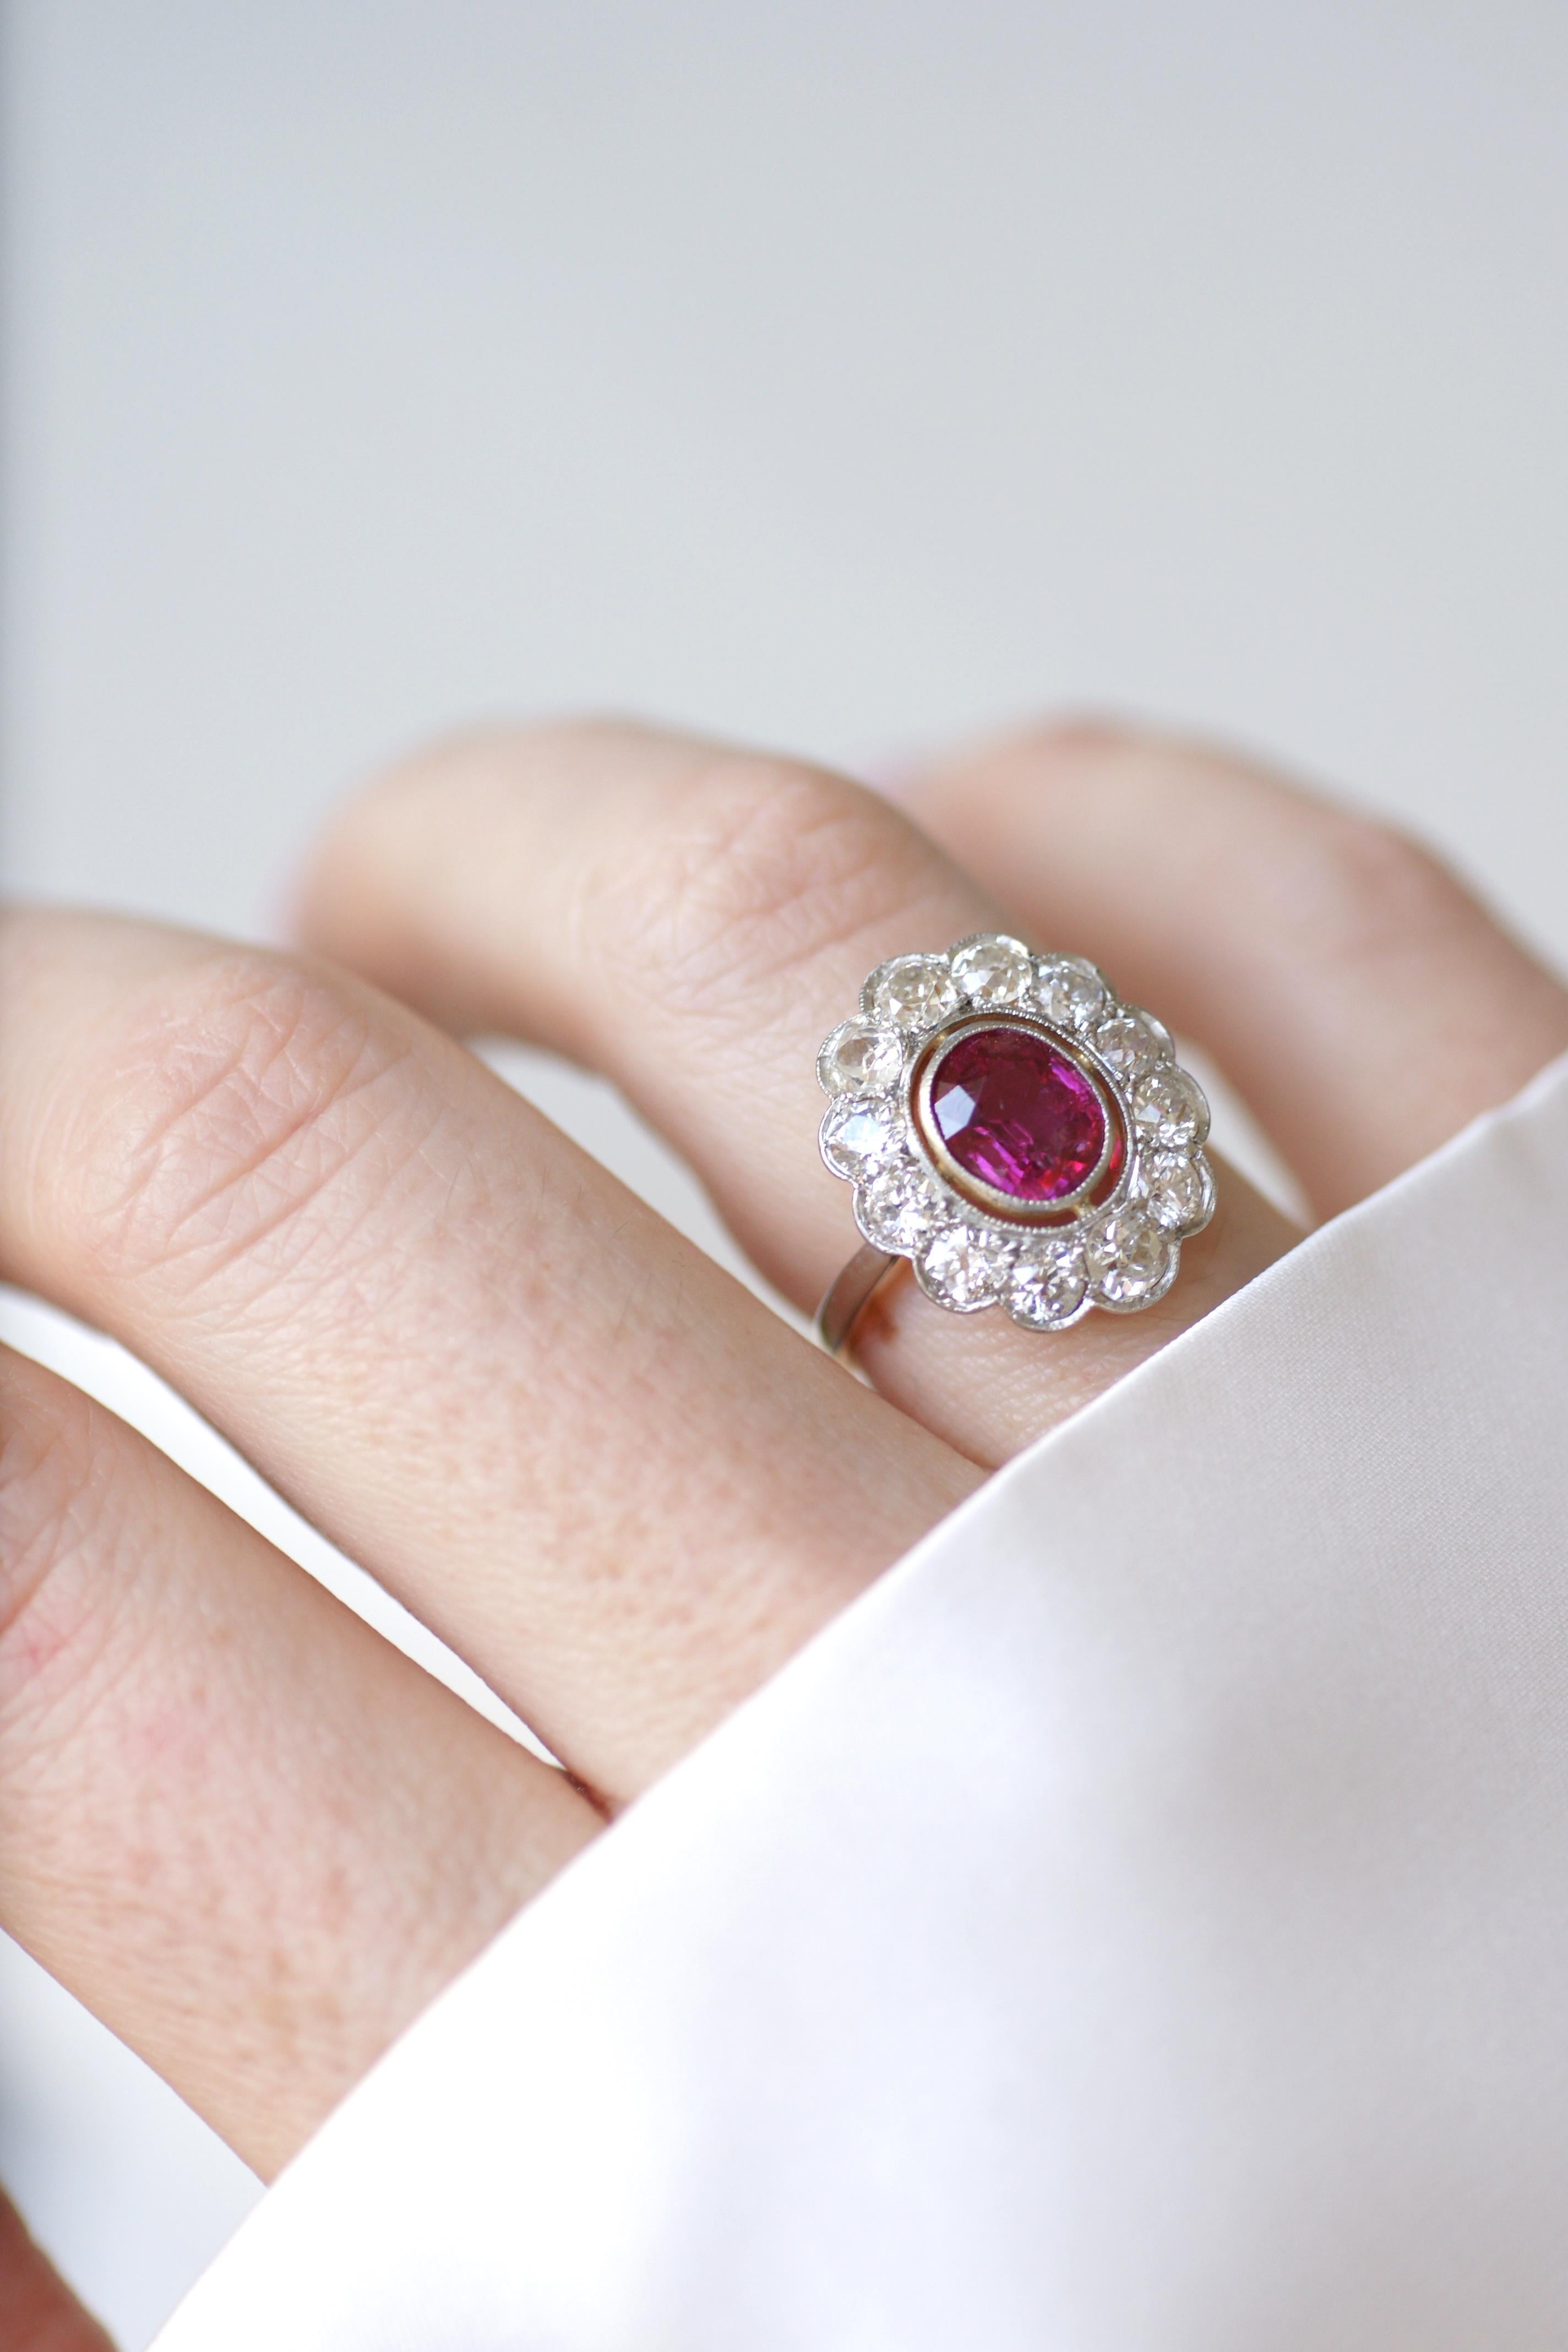 Women's Edwardian Cluster Ring, Unheated Burmese Ruby 1.60 Cts, Diamond Surround For Sale